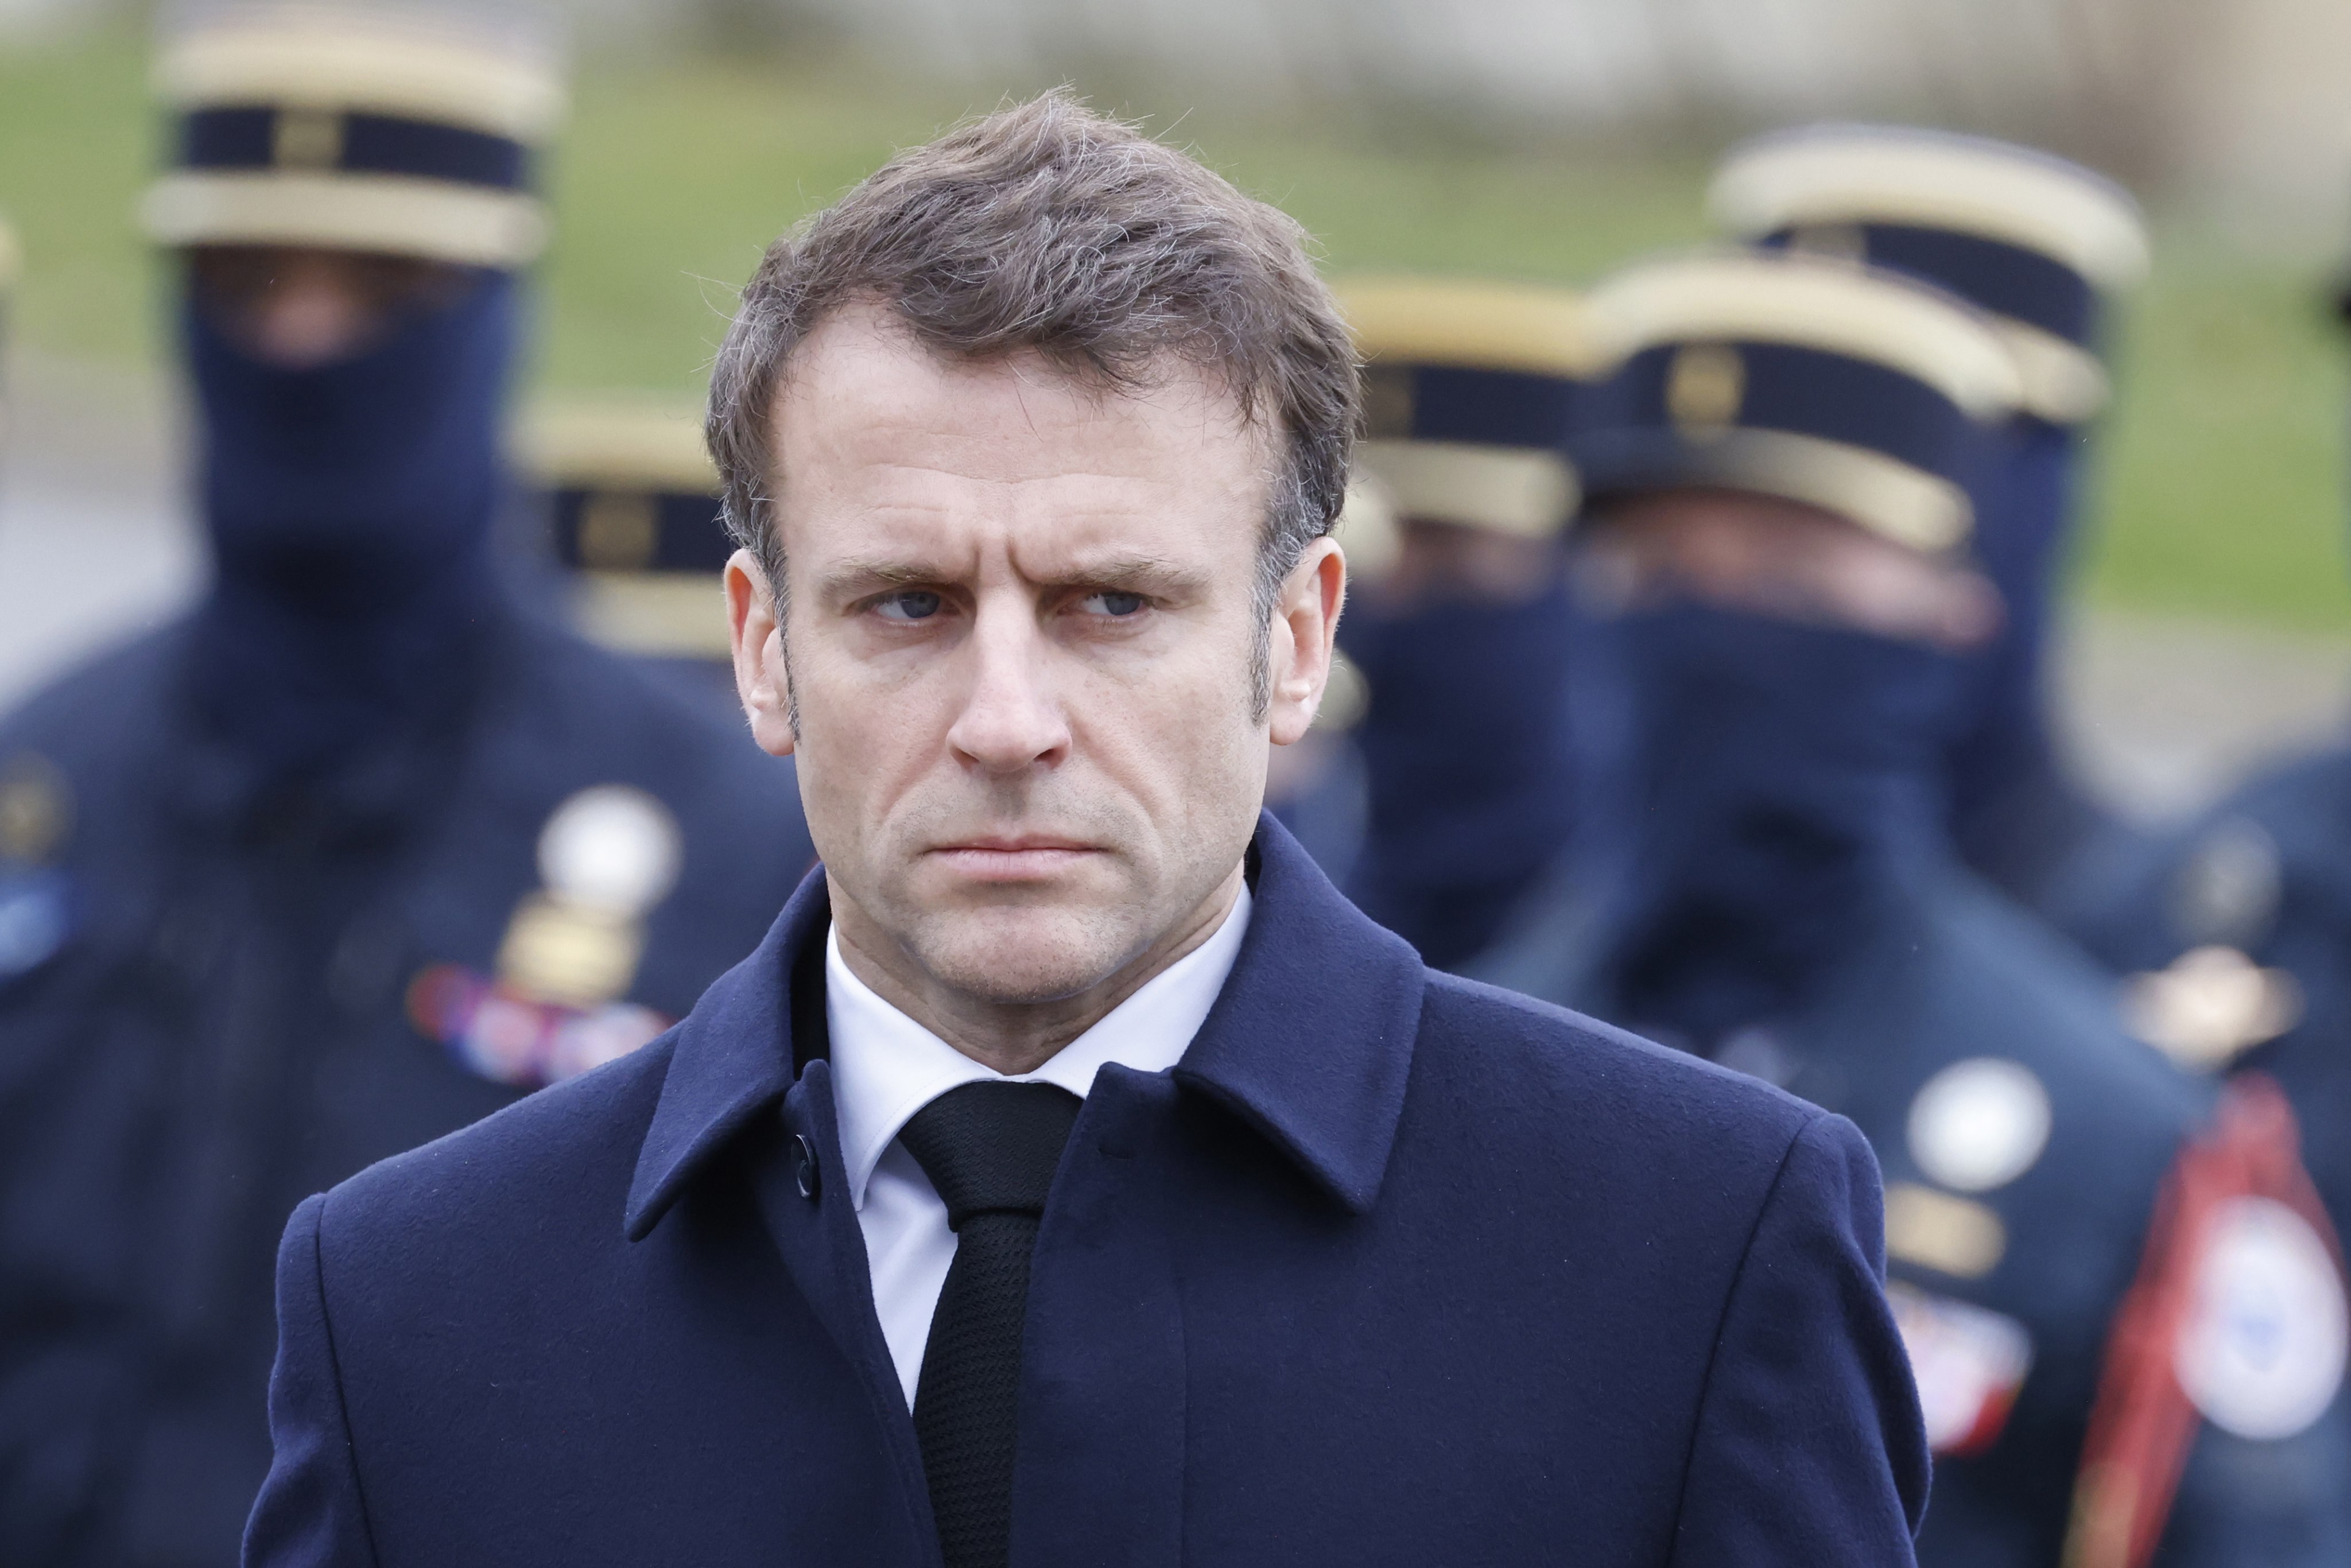 French President Emmanuel Macron has said Russia’s withdrawal from Ukraine is the only way for peace. Photo: EPA-EFE